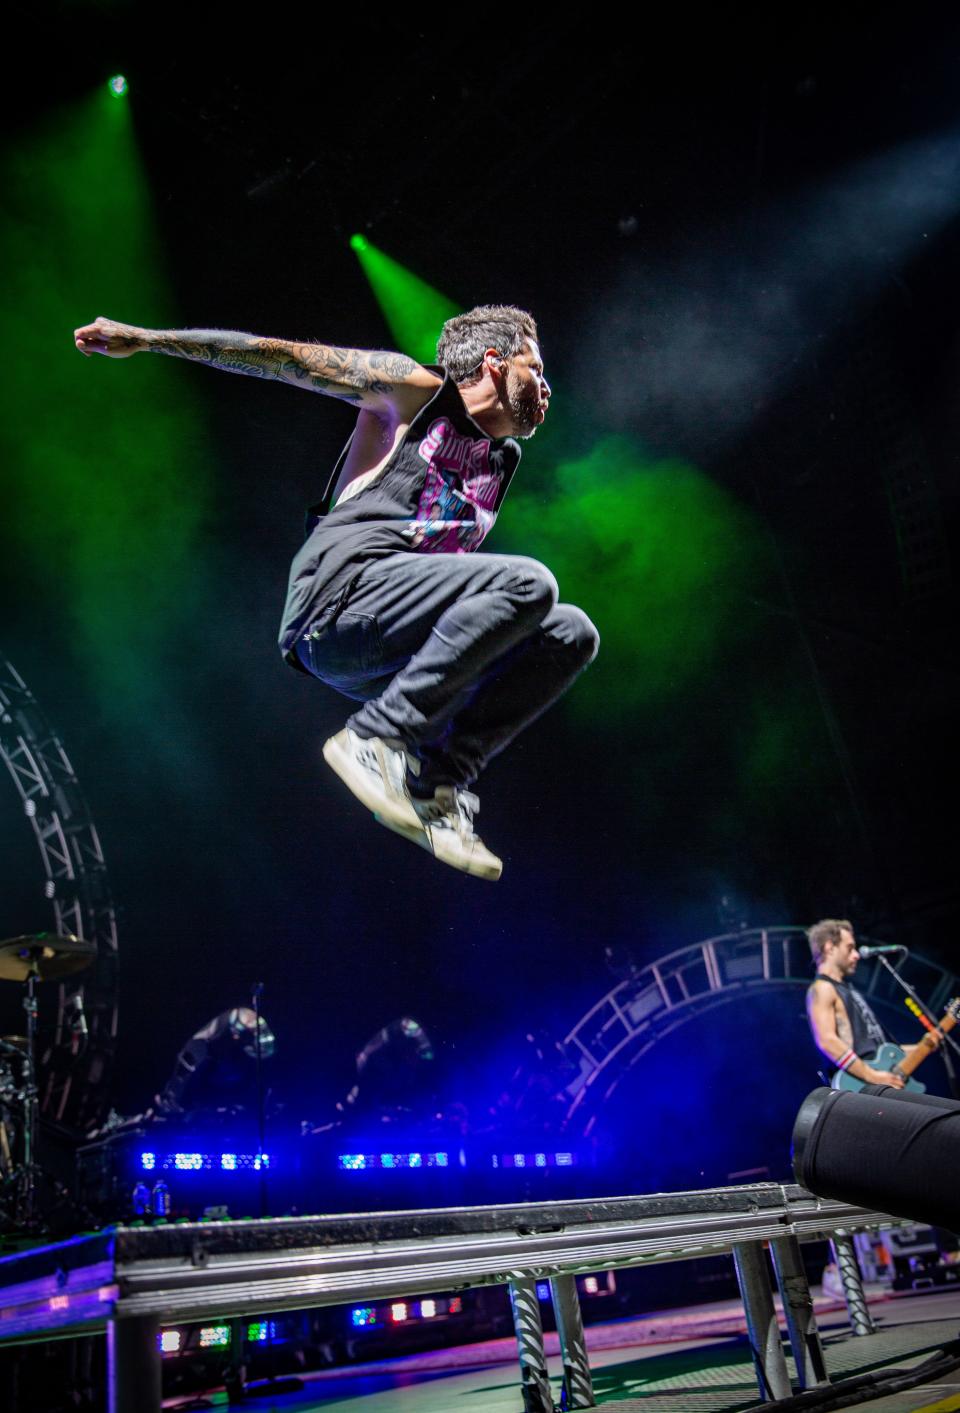 Serious air time for Simple Plan singer Pierre Bouvier.